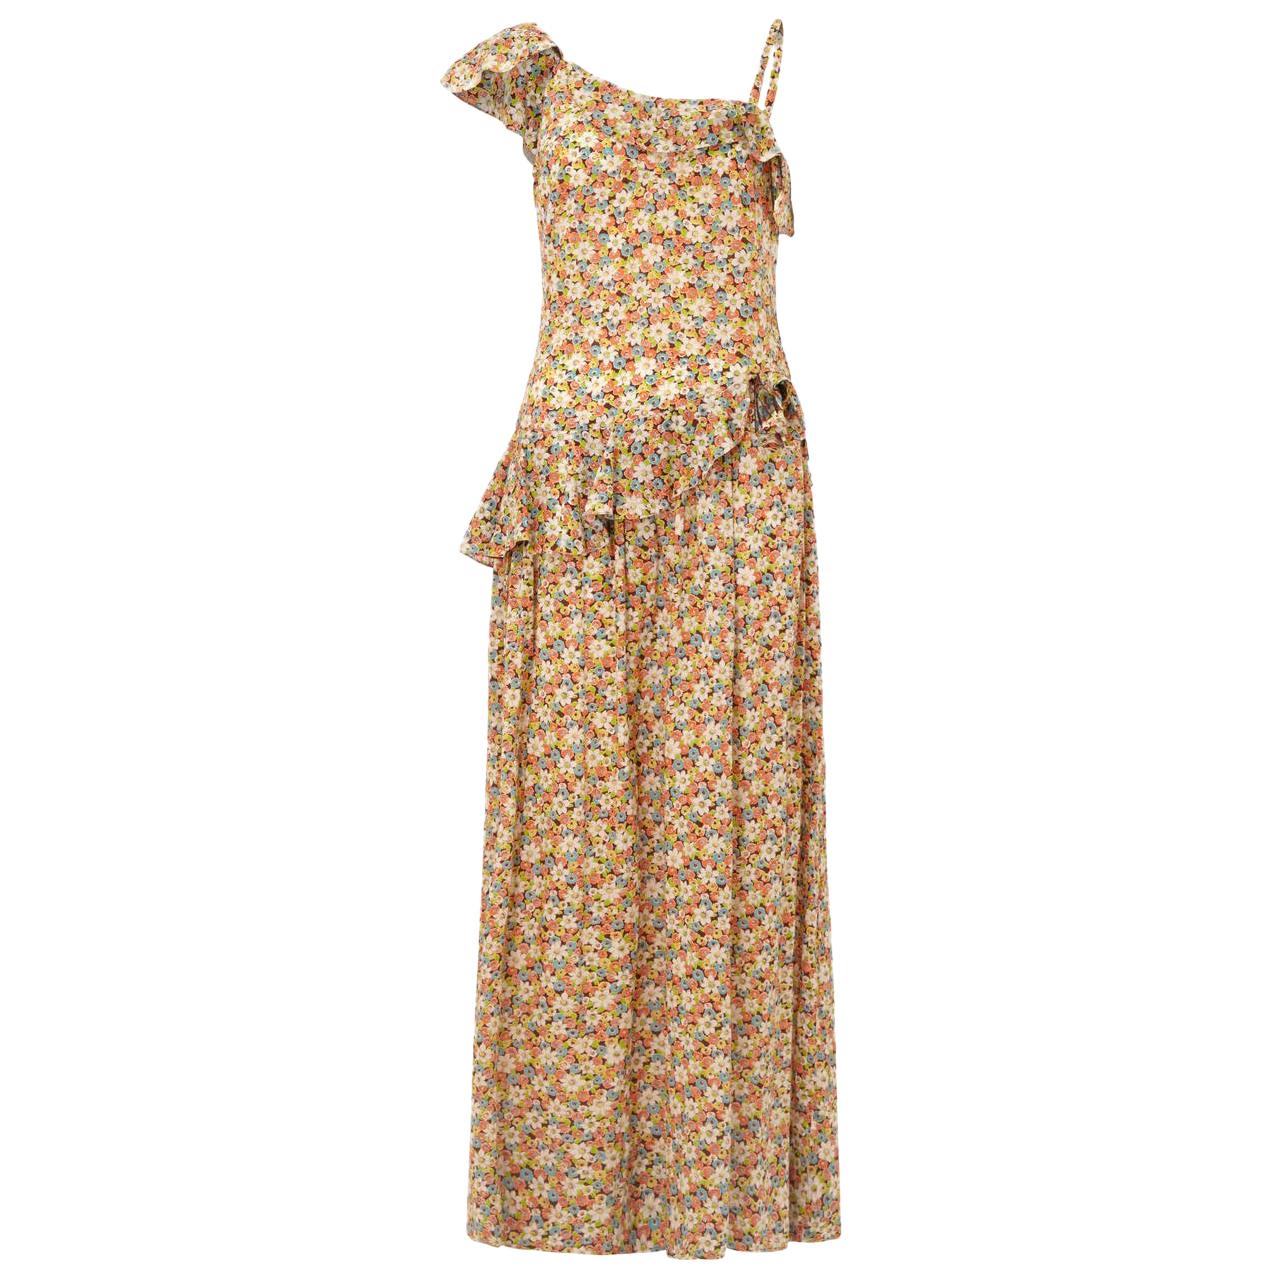 1950s Elysian Floral Cotton Dress With Asymmetrical Neckline and Peplum